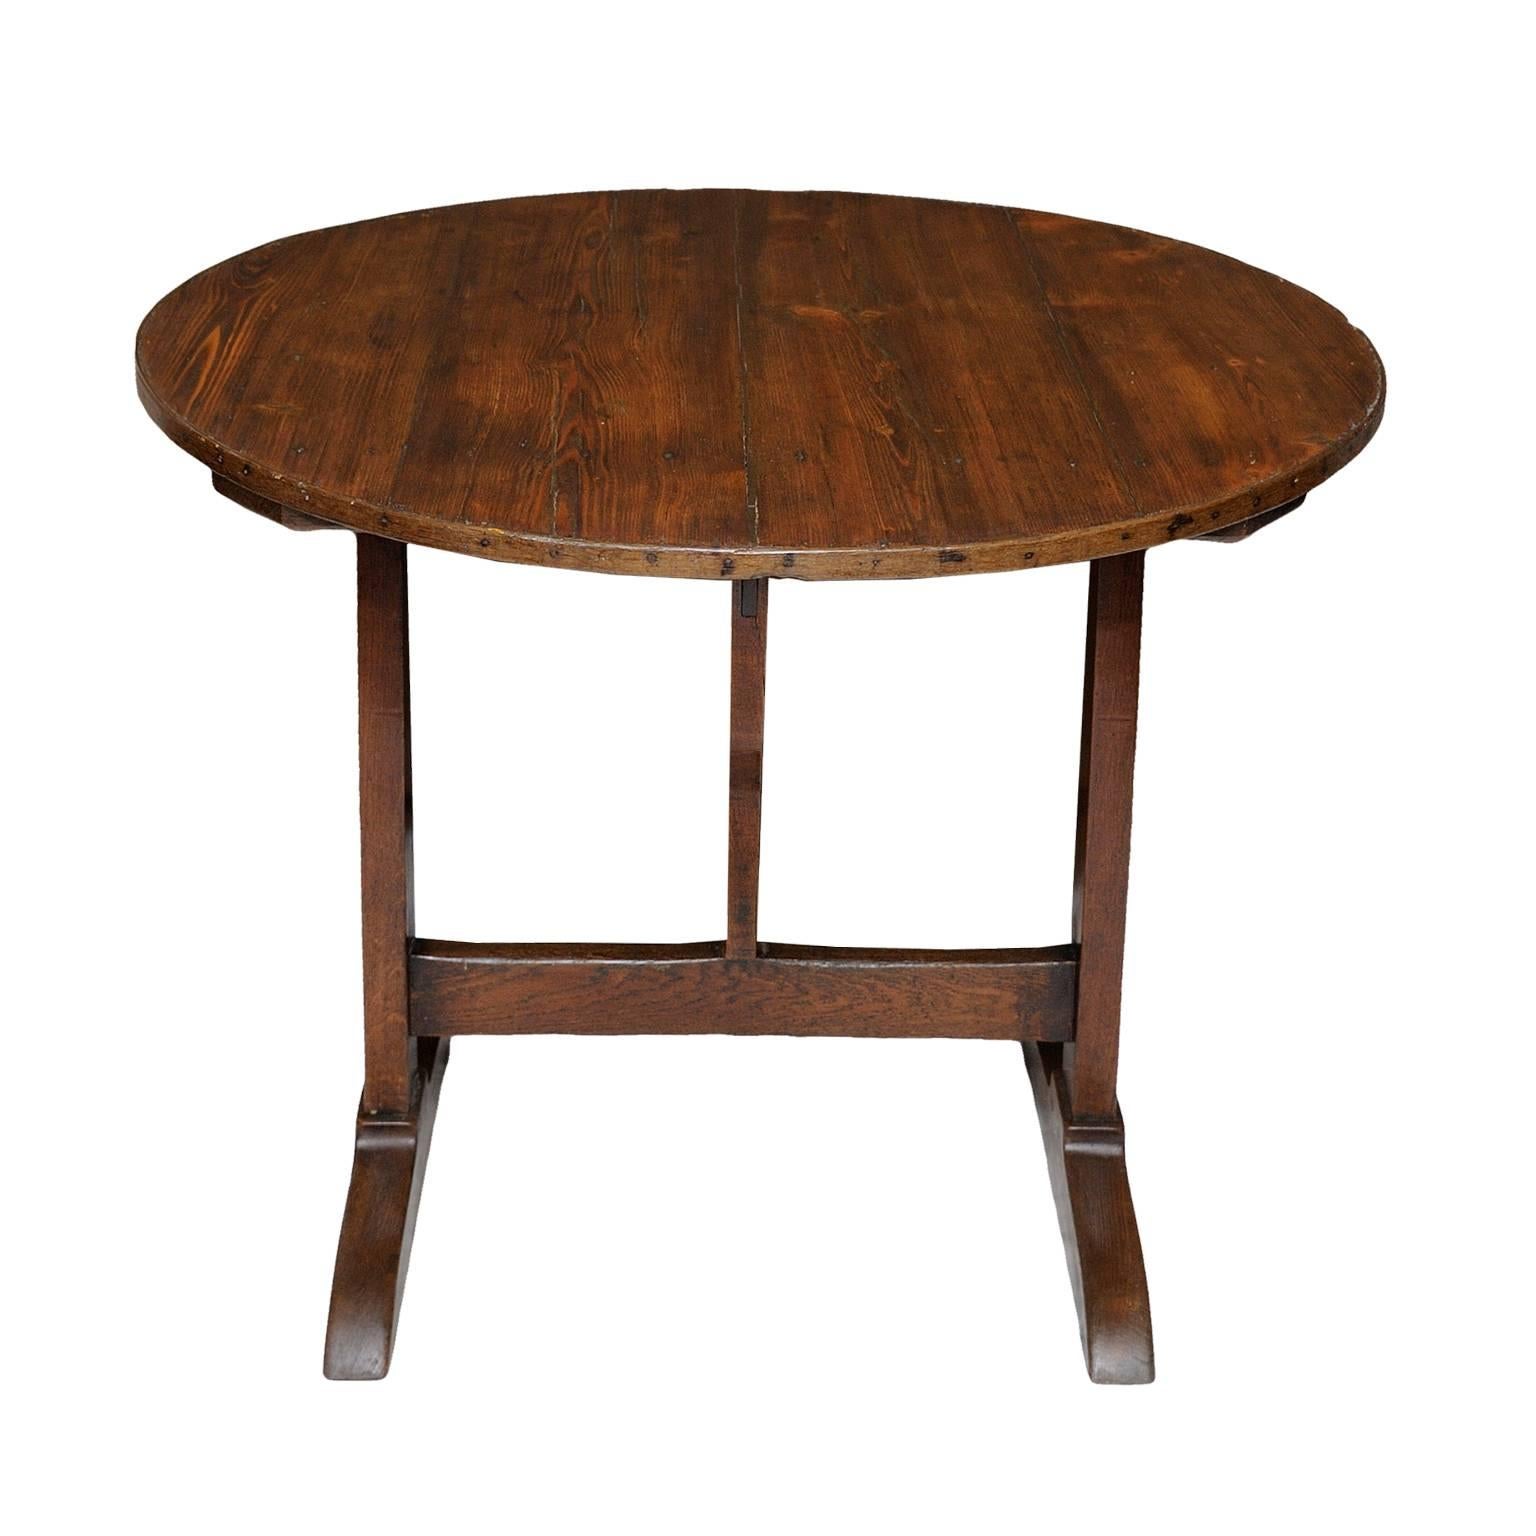 This is a rather charming and extremely useful mid-19th century French wine tasting table.
Constructed in pine and oak, the table has a wish bone tipping action, that allows this rather pretty table to be folded into a very compact size, circa